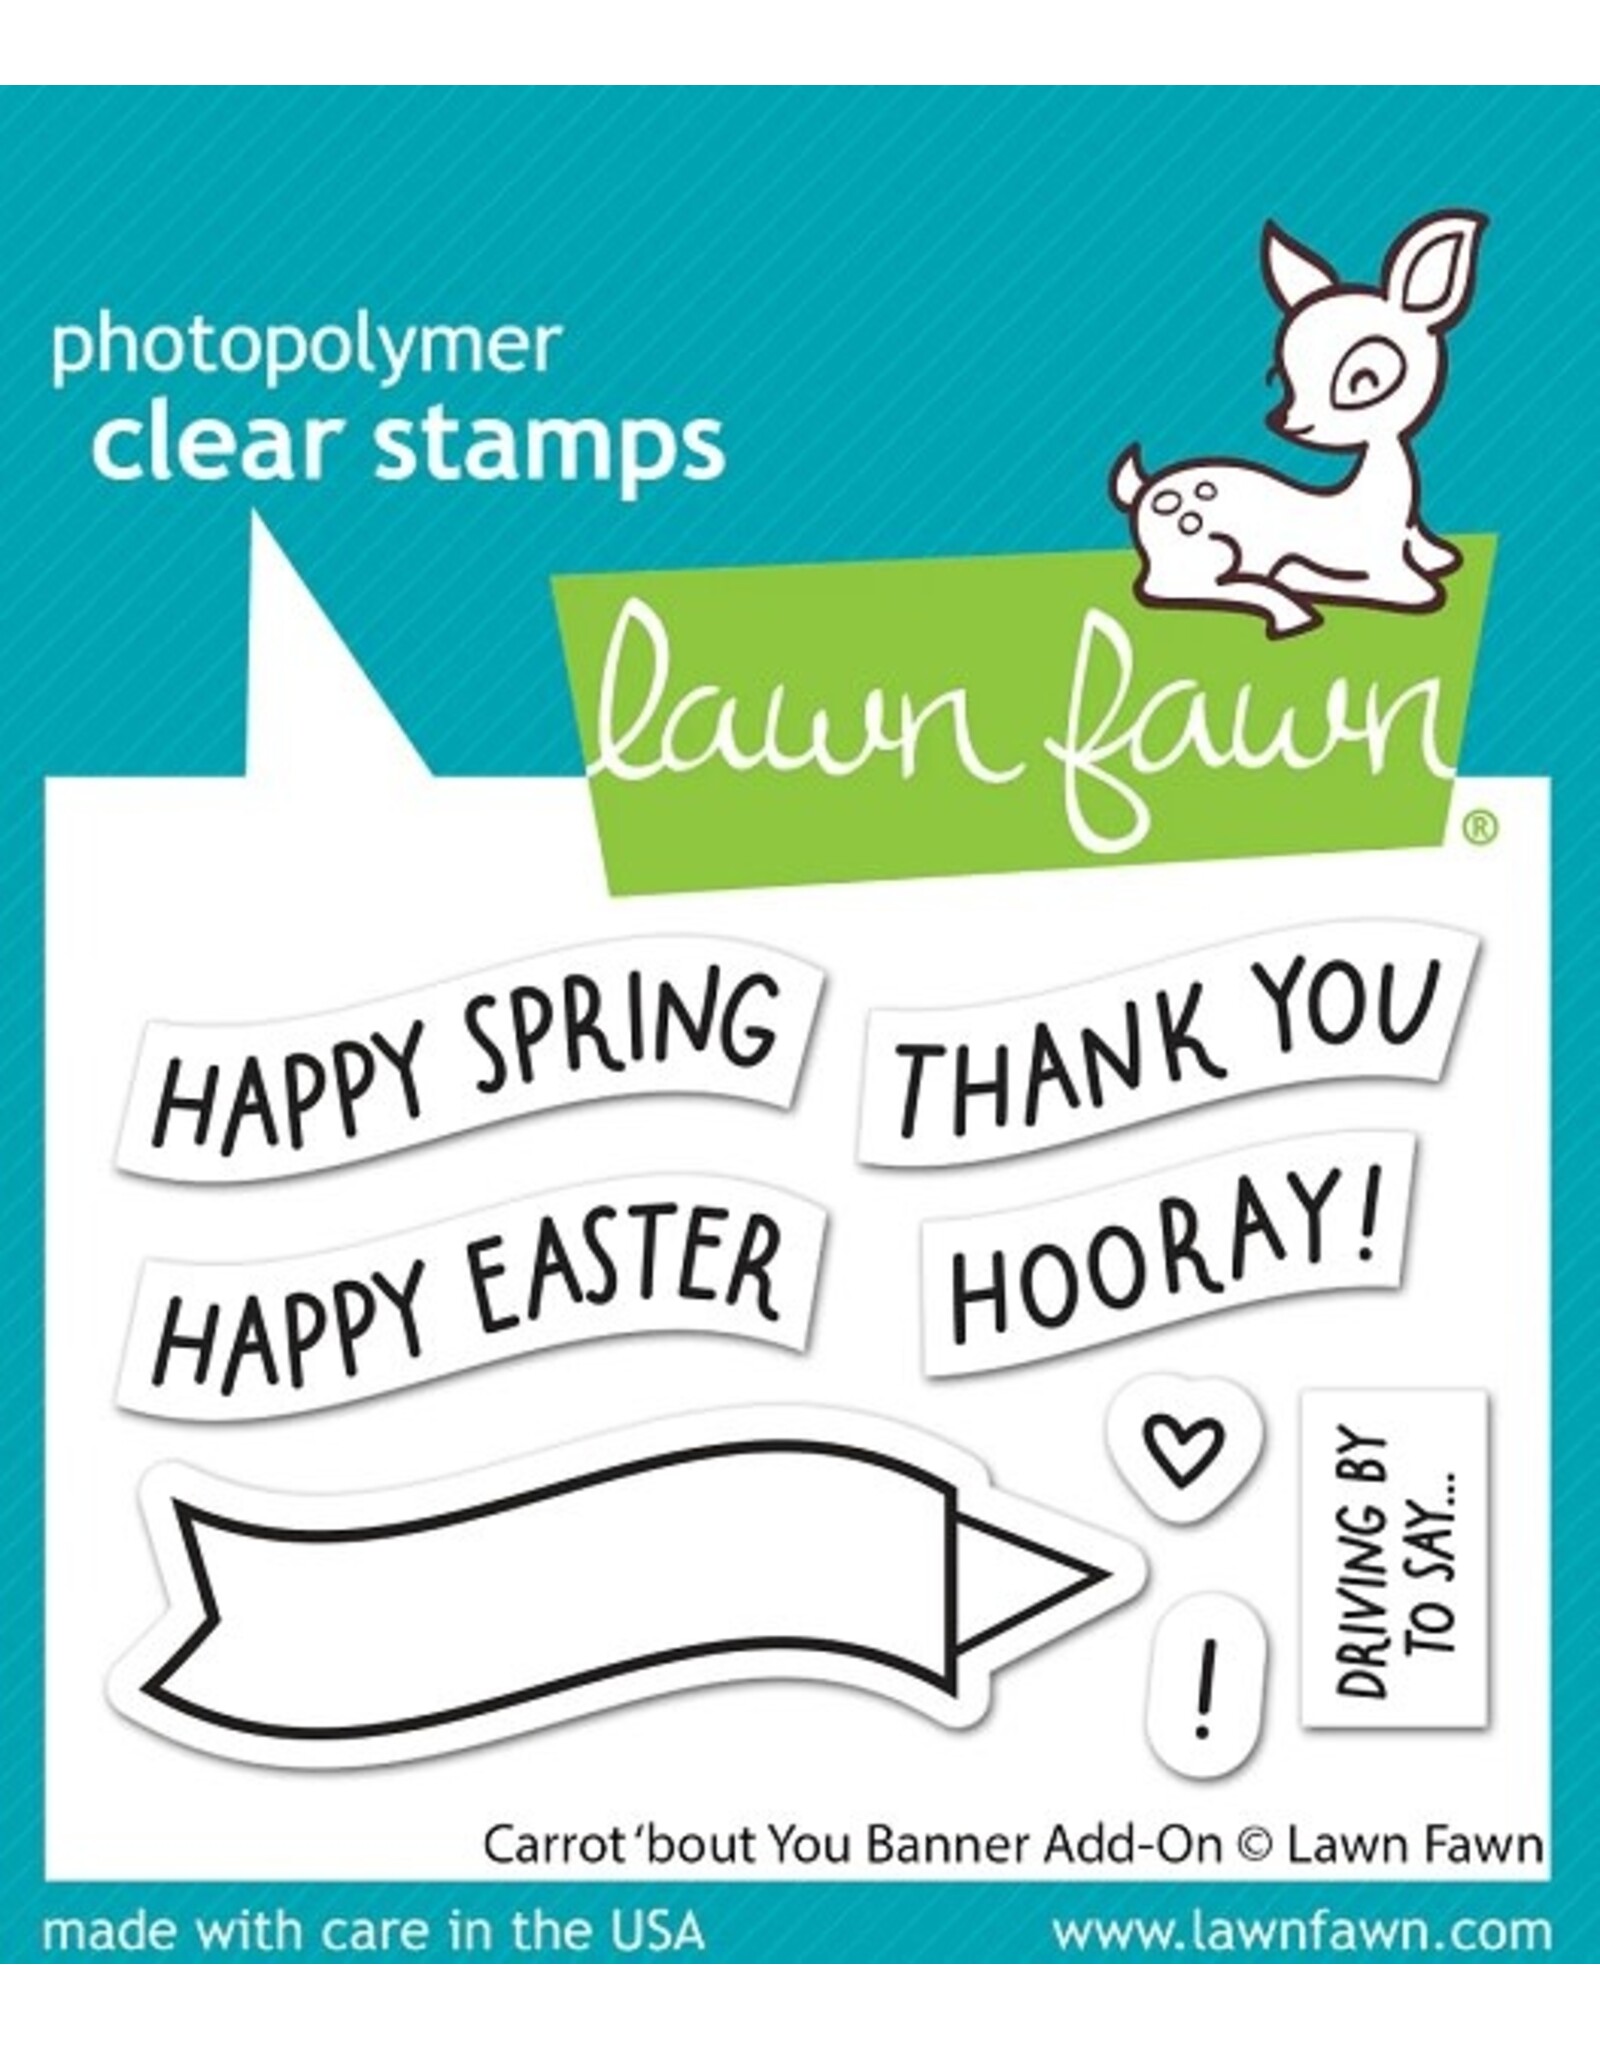 Lawn Fawn carrot 'bout you banner add-on